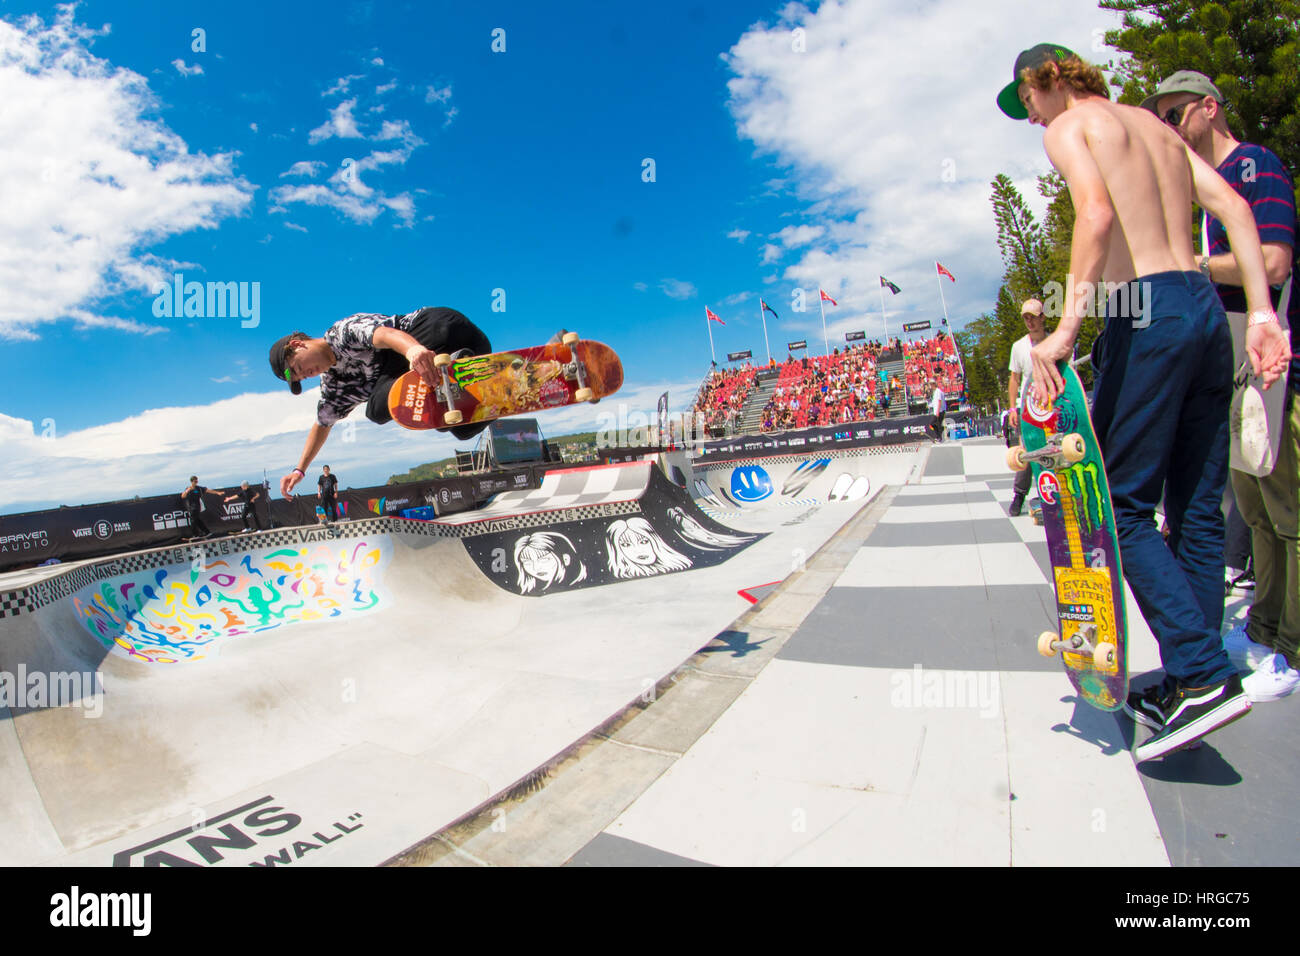 Sydney, Australia - 2nd March 2017: Australian Open of Surfing Sports Event at Manly Beach, Australia featuring Surfing, BMX, Skating and Music.  Pictured are  athletes preparing / practing ahead of the Vans Pro Park Series BMX / Skate competion which is set to take place during the Australian Open of Surfing. Credit: mjmediabox/Alamy Live News Stock Photo